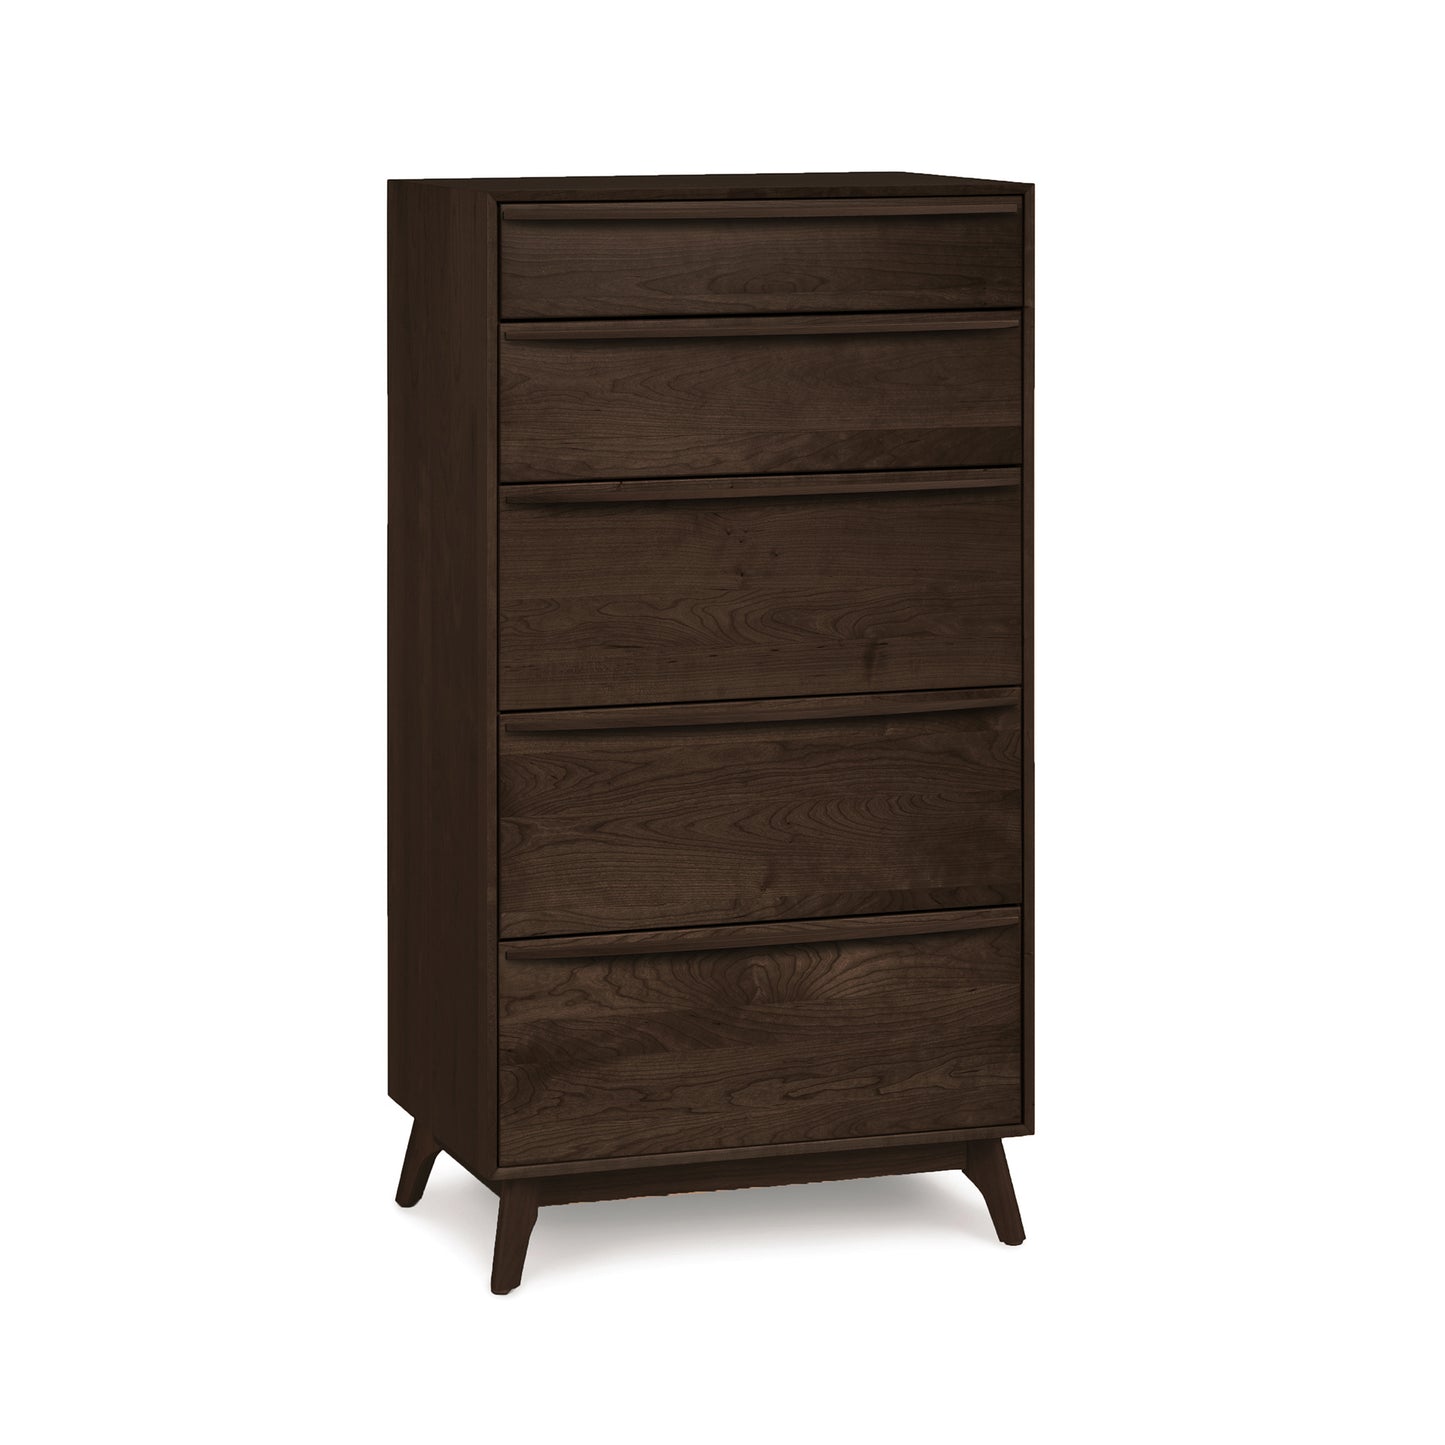 A dark brown solid wood Catalina 5-Drawer Chest with slanted legs from the Copeland Furniture, posing on a white background.